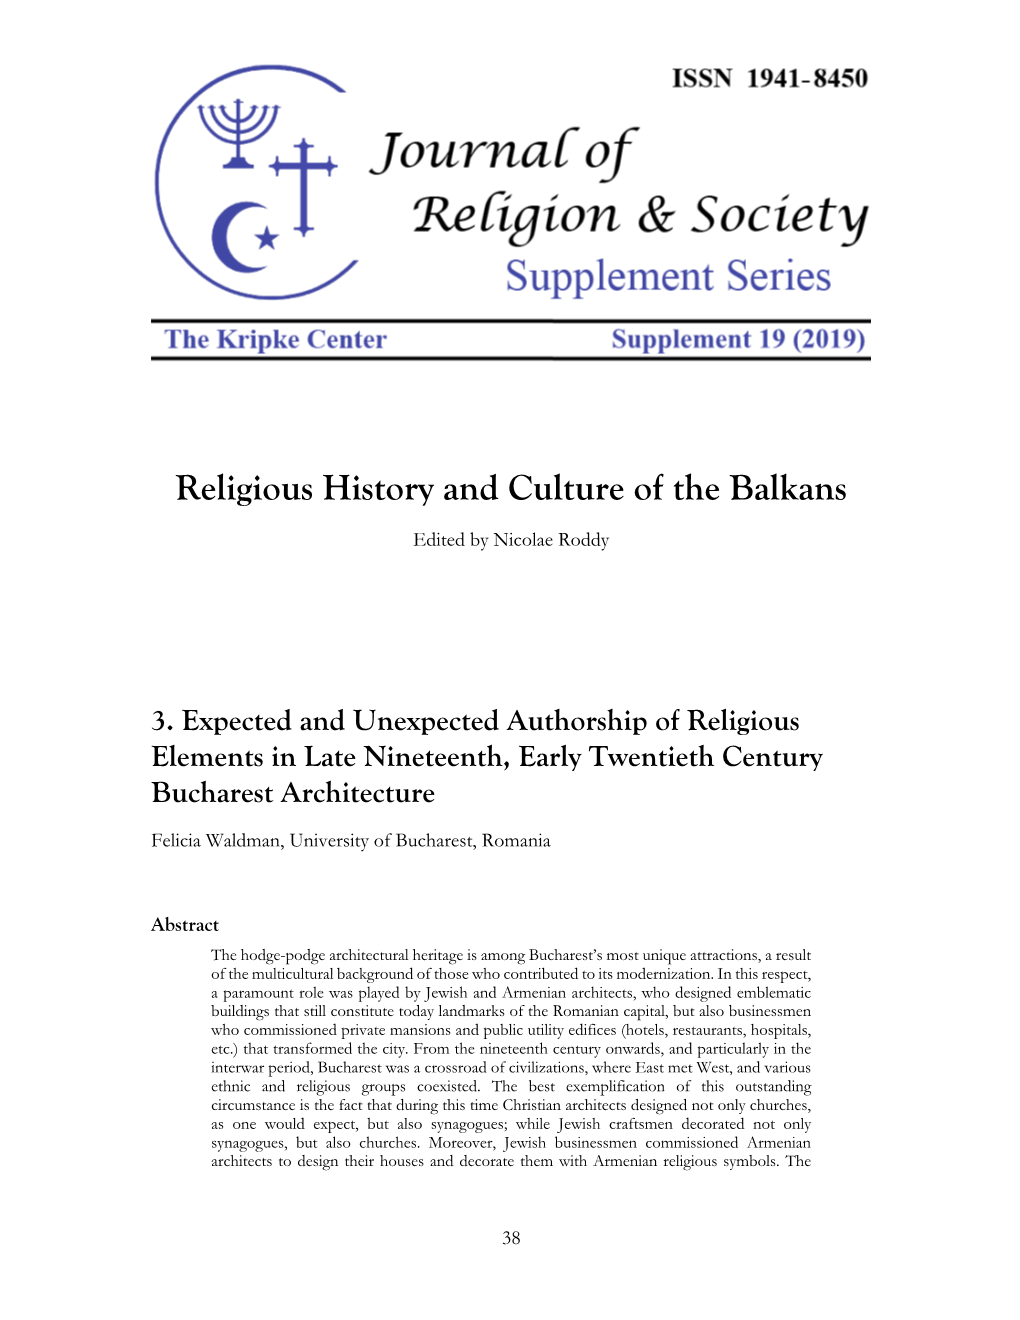 Religious History and Culture of the Balkans